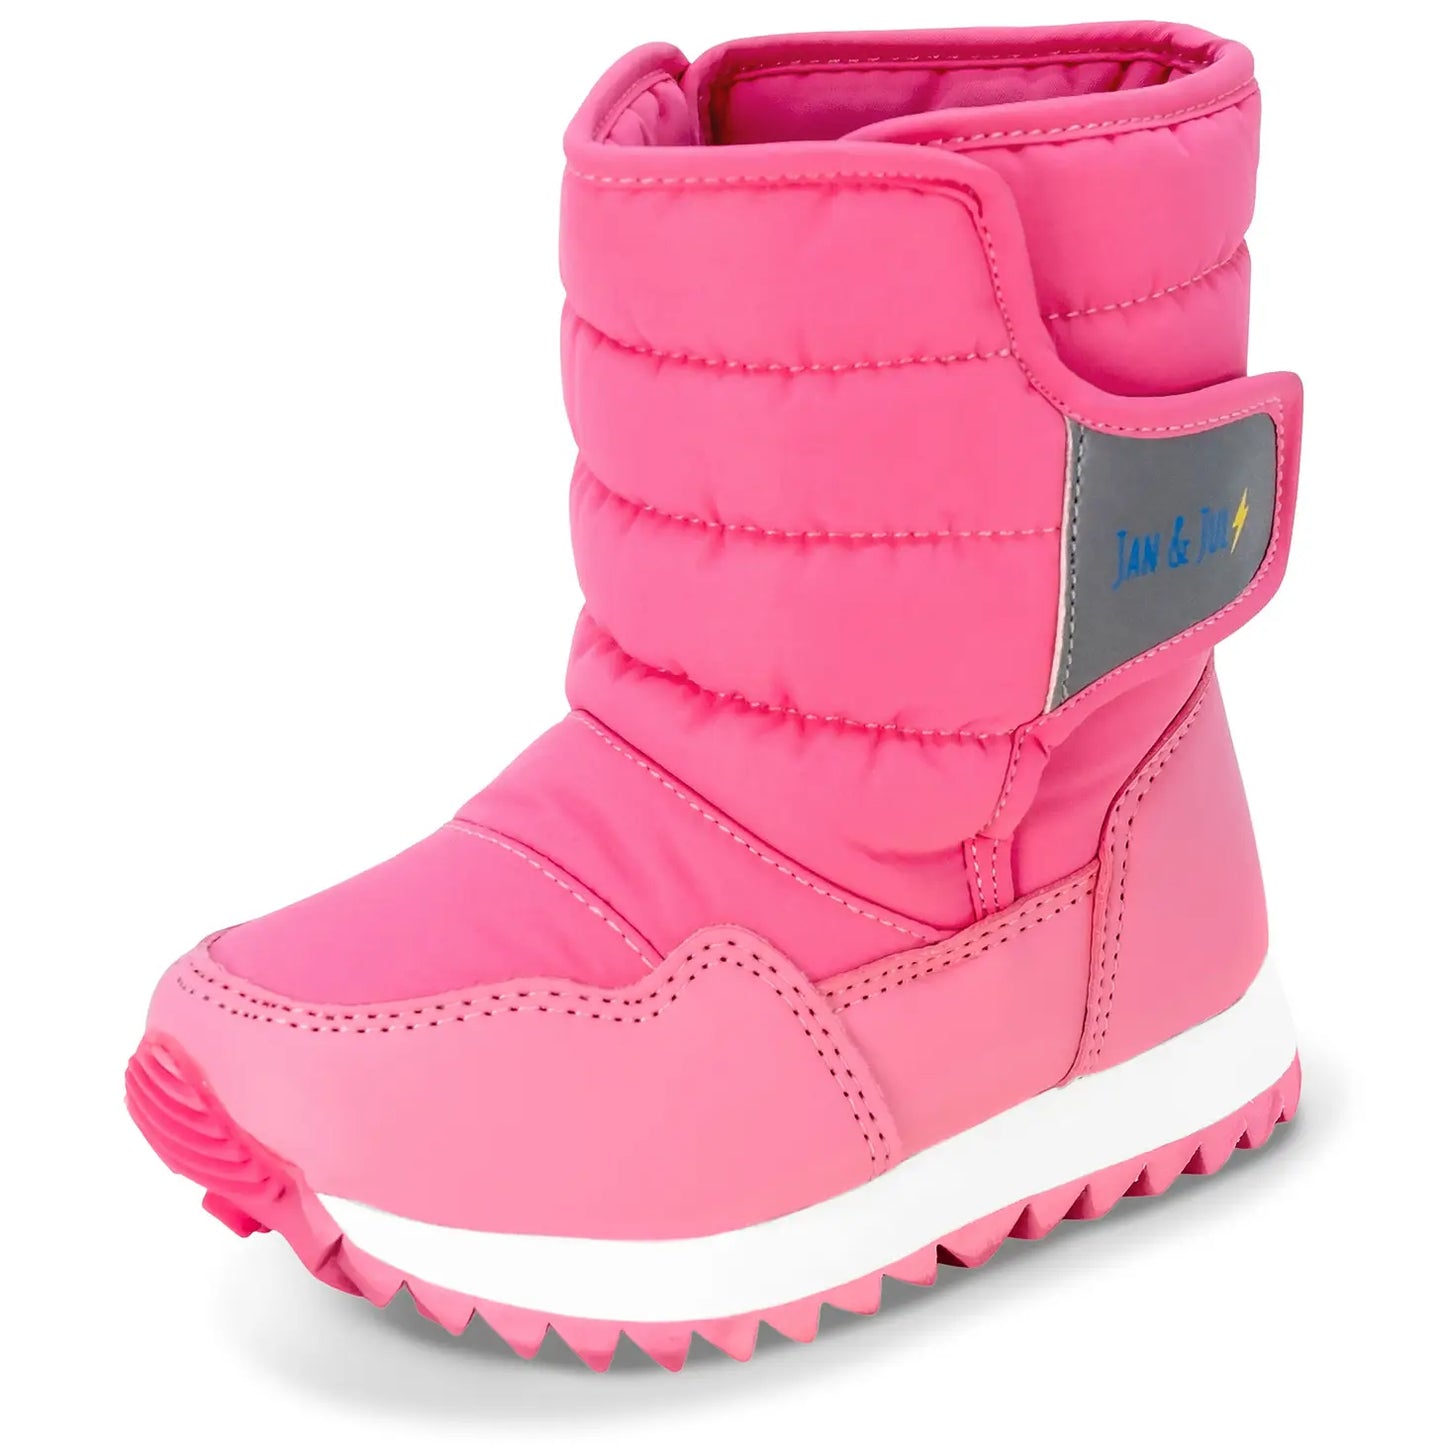 Toasty Dry Tall Puffy Winter Boots, Watermelon Pink - Magpies Paducah